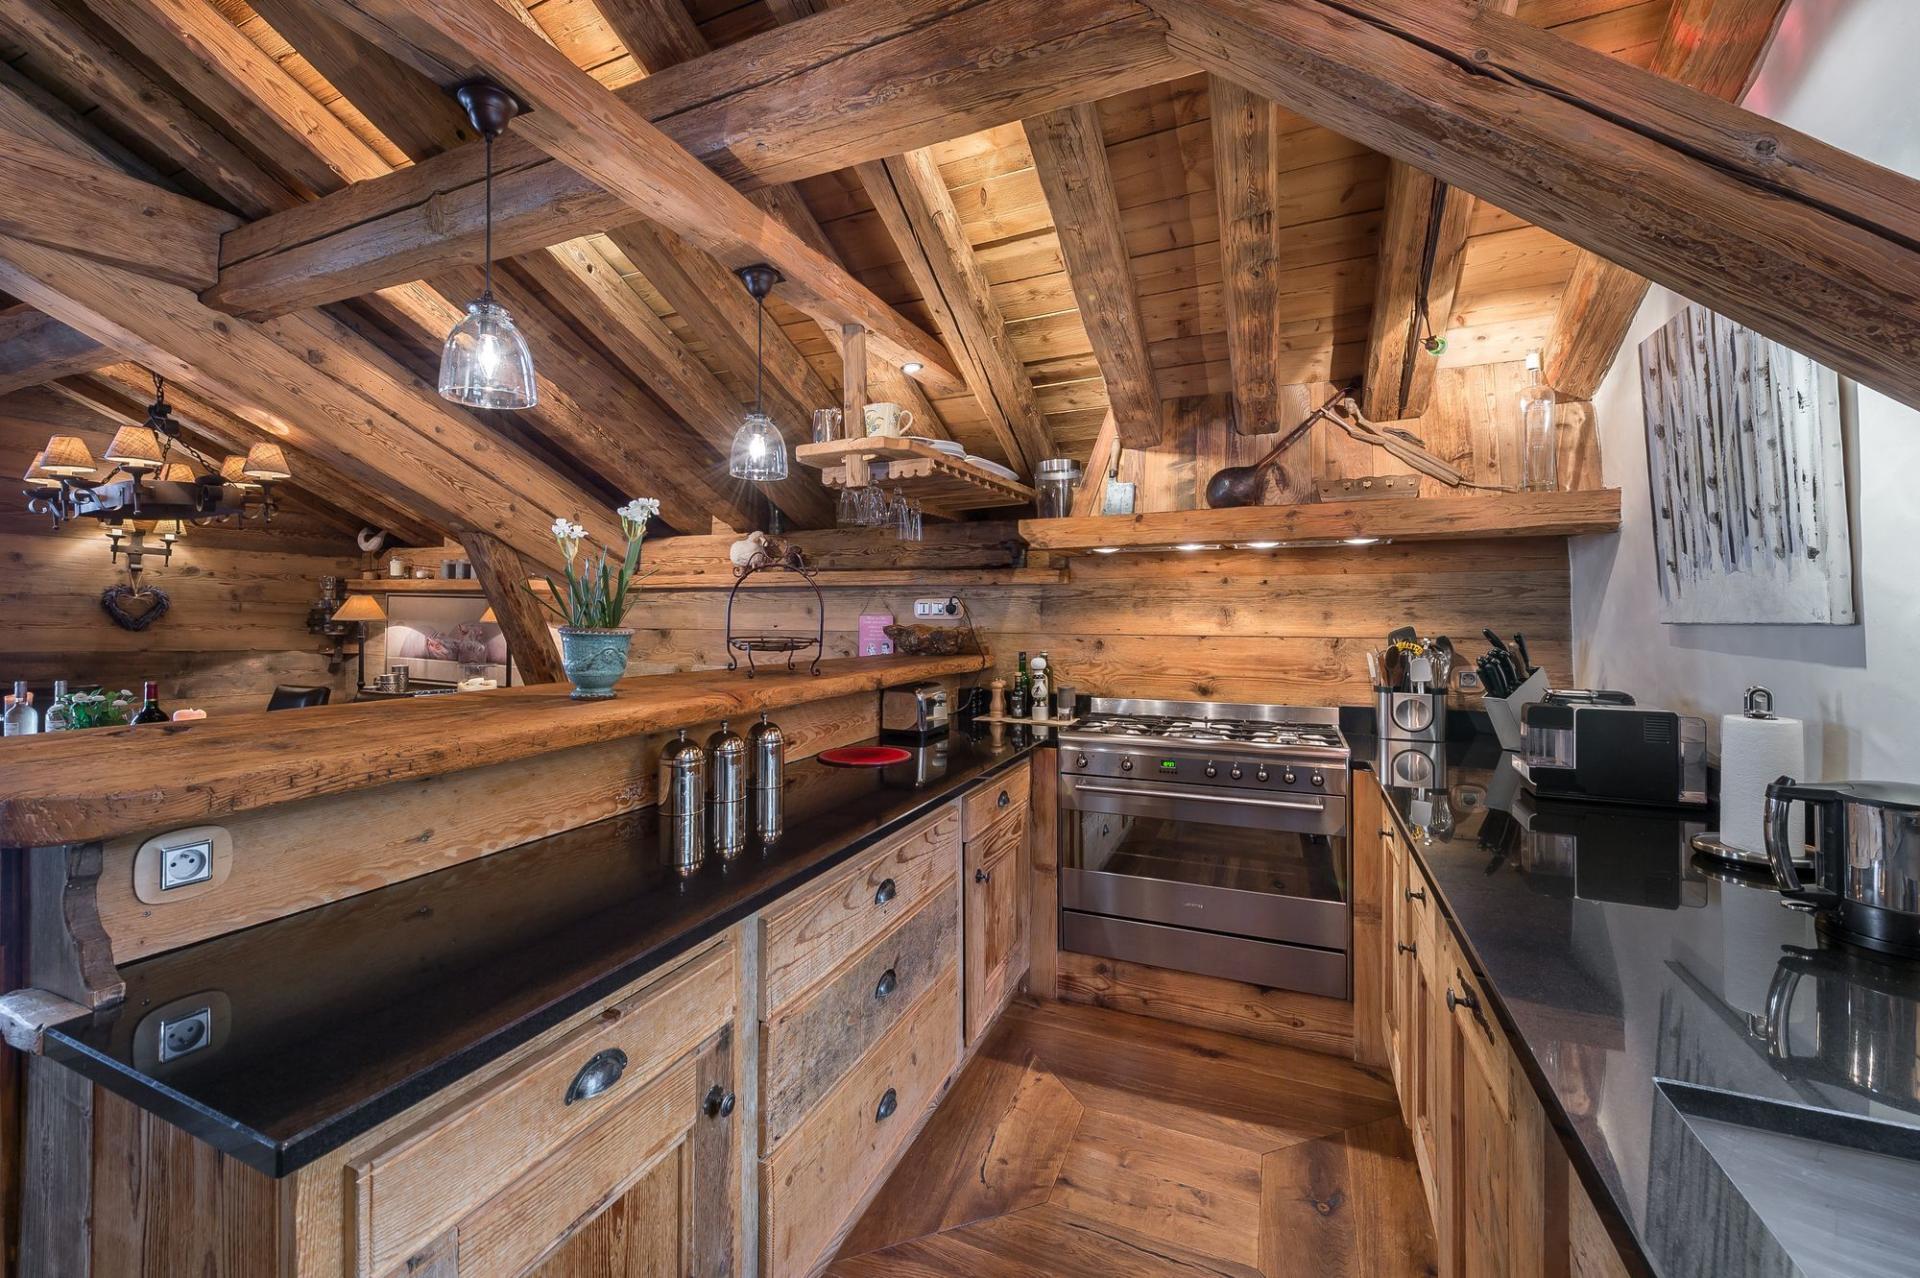 CHALET BELLECOTE AND ITS OPENED-PLAN  KITCHEN